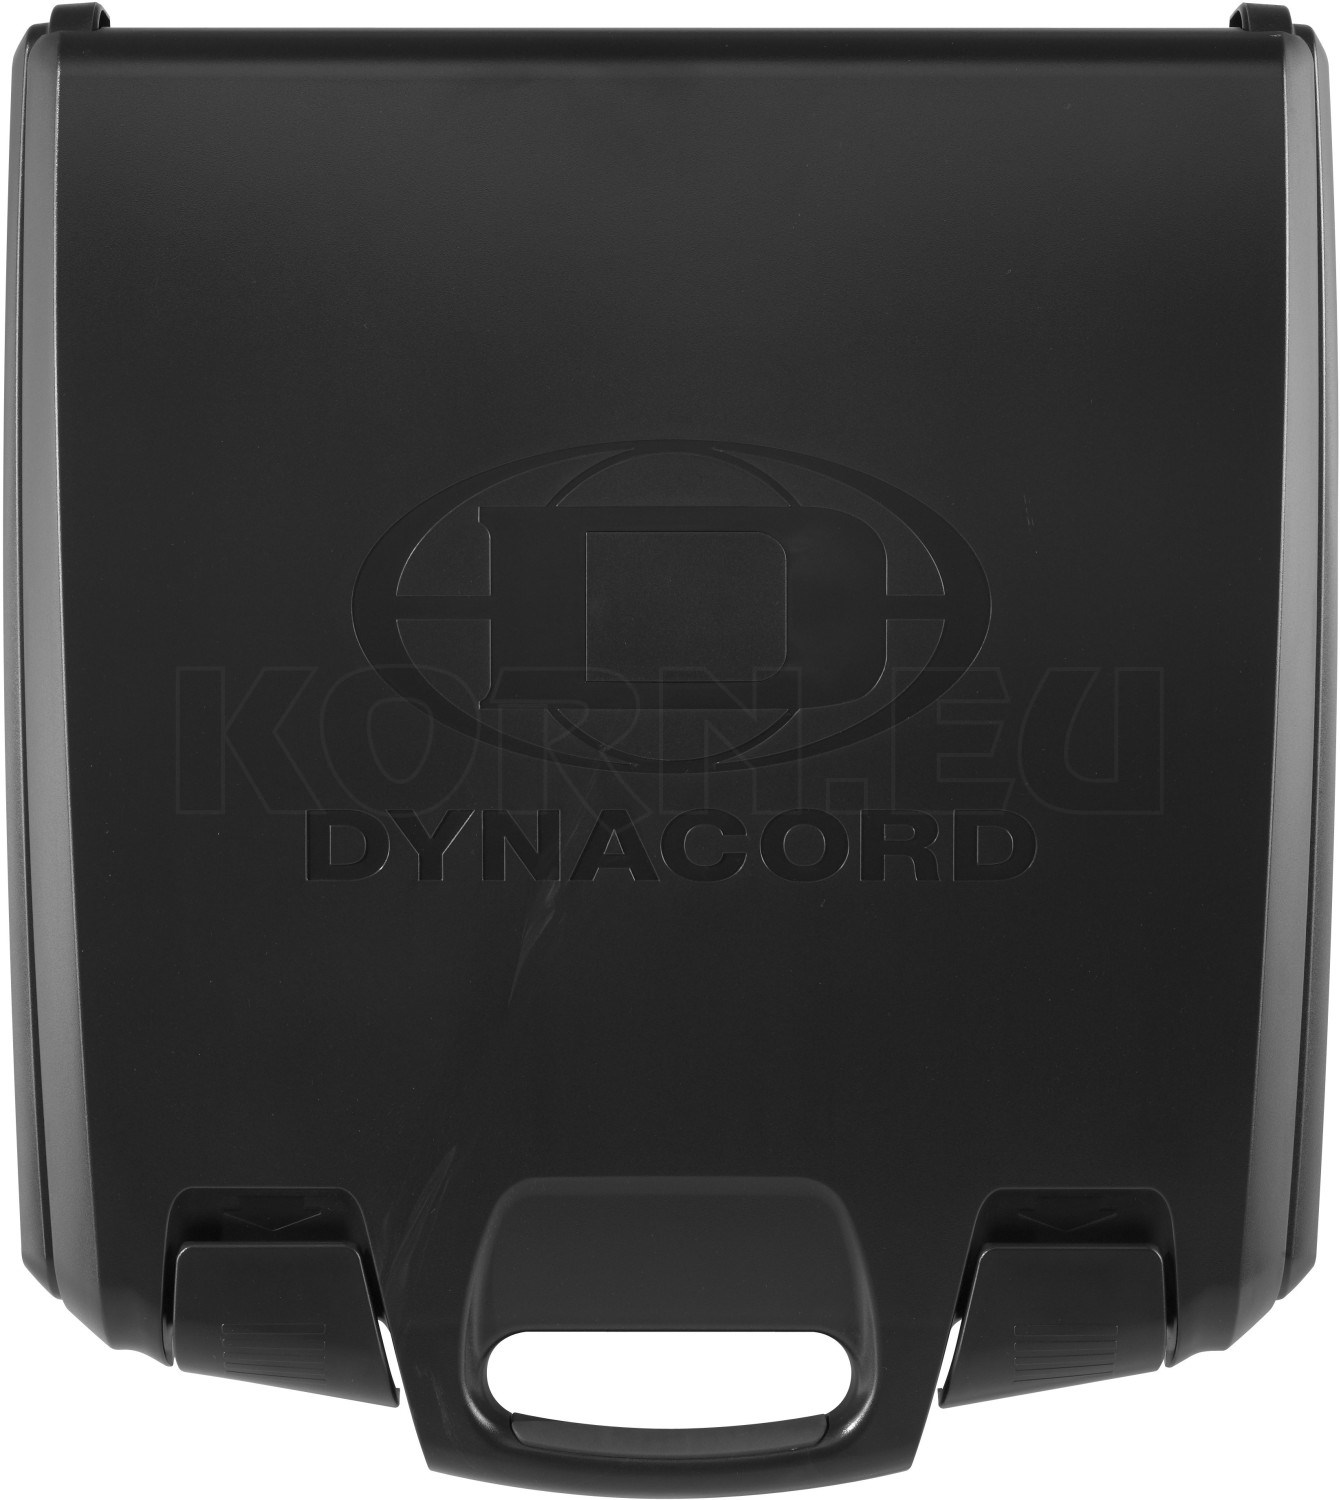 Dynacord Cms 1000 3 Oder Powermate 1000 3 Cover Musikhaus